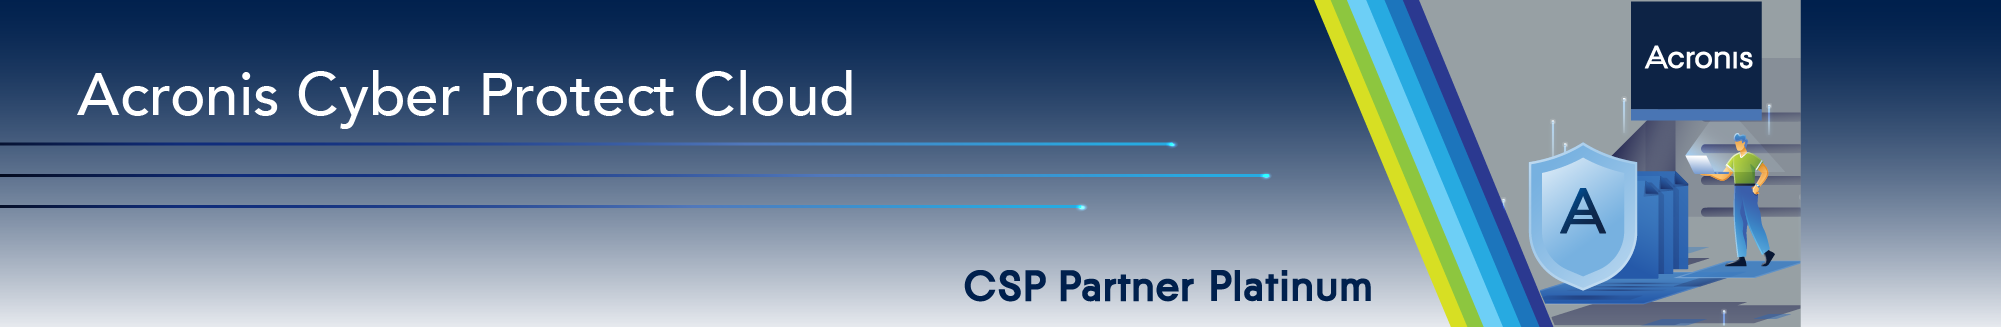 acronis cyber protect cloud logo banner 